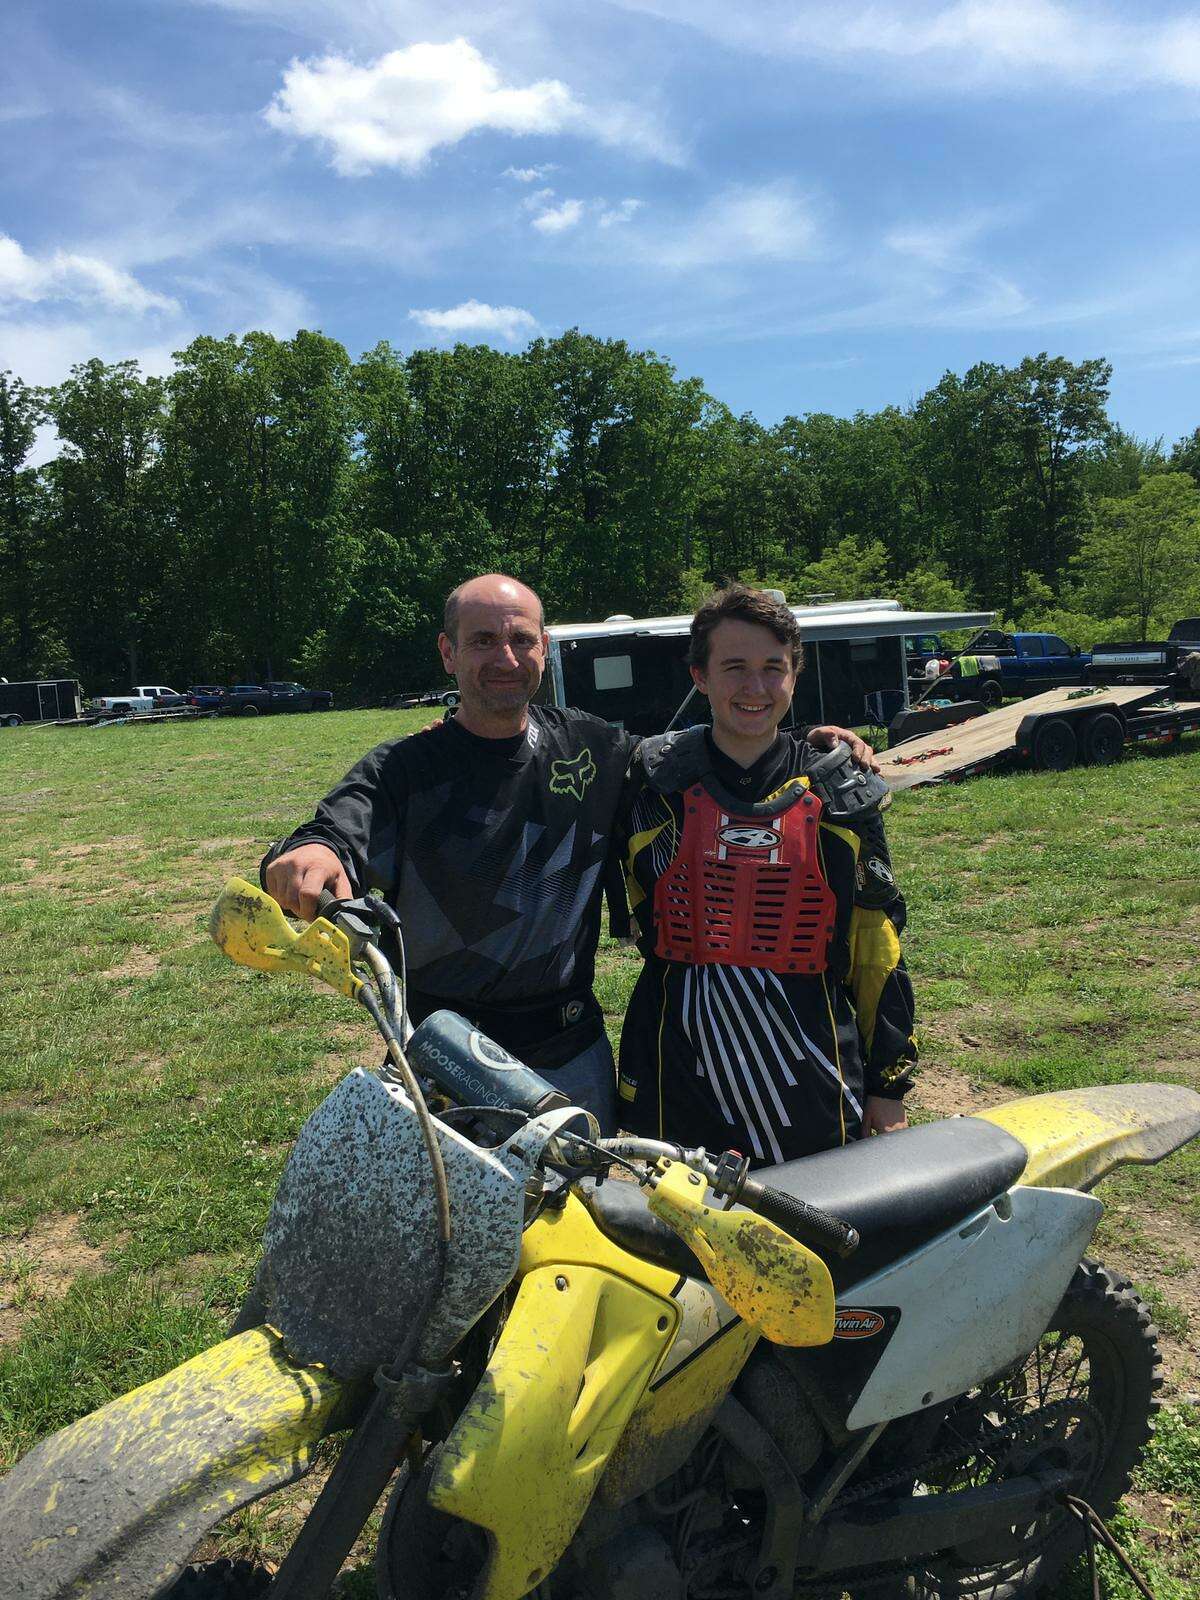 Frank McCarty loves to ride dirt bikes with his son, and enjoys axe-throwing.